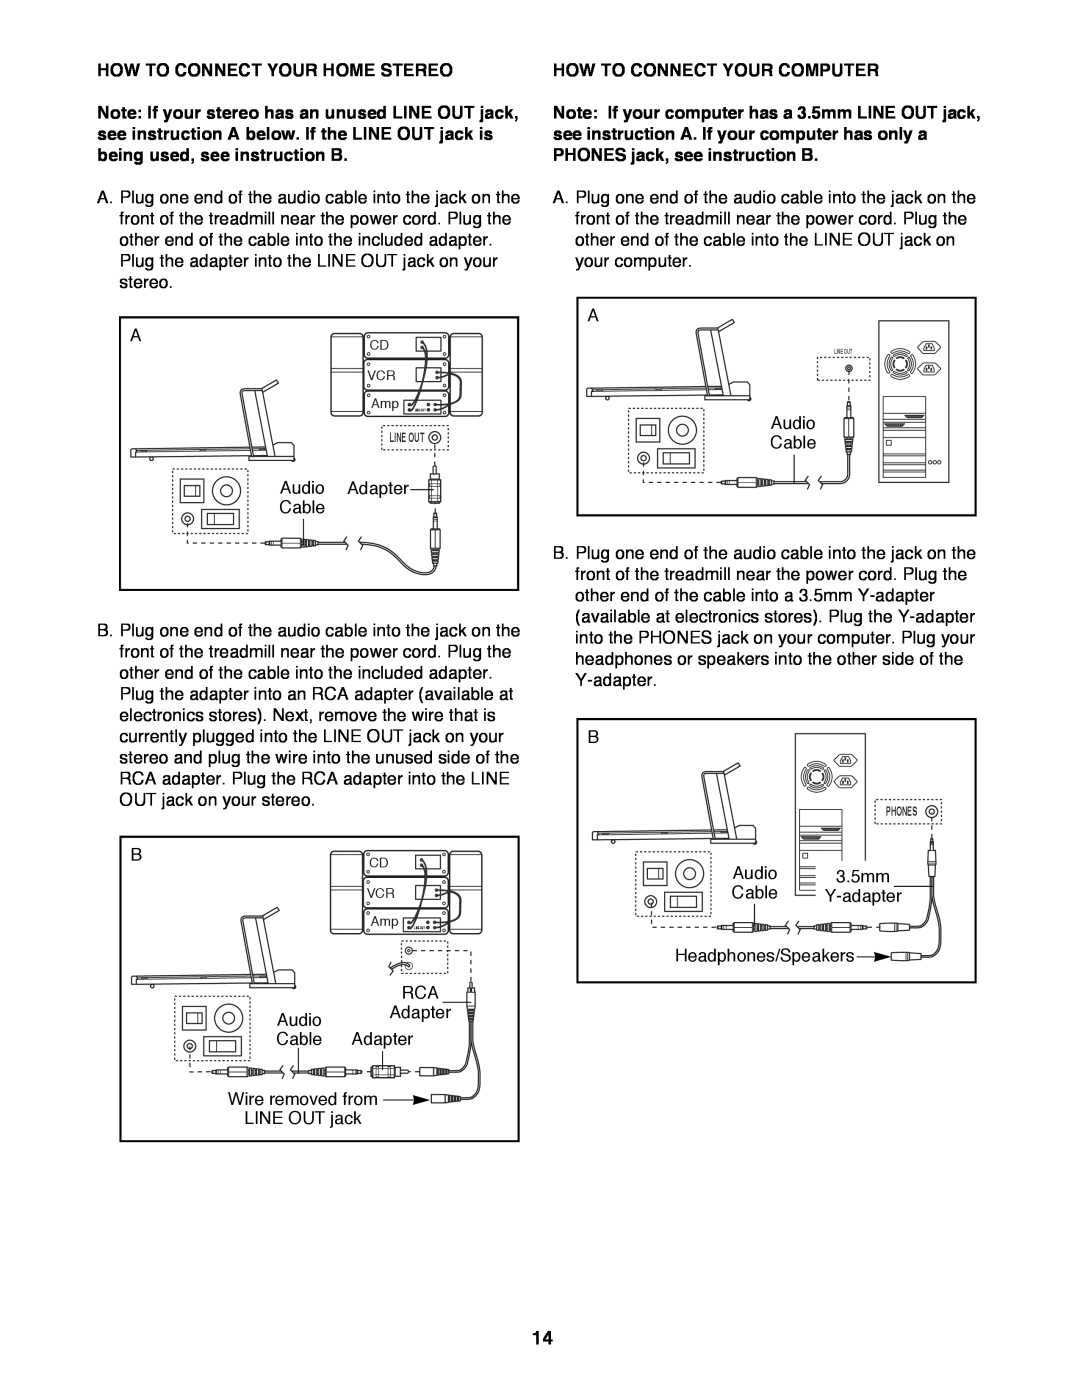 ProForm 831.299460 user manual How To Connect Your Home Stereo, How To Connect Your Computer, Line Out 